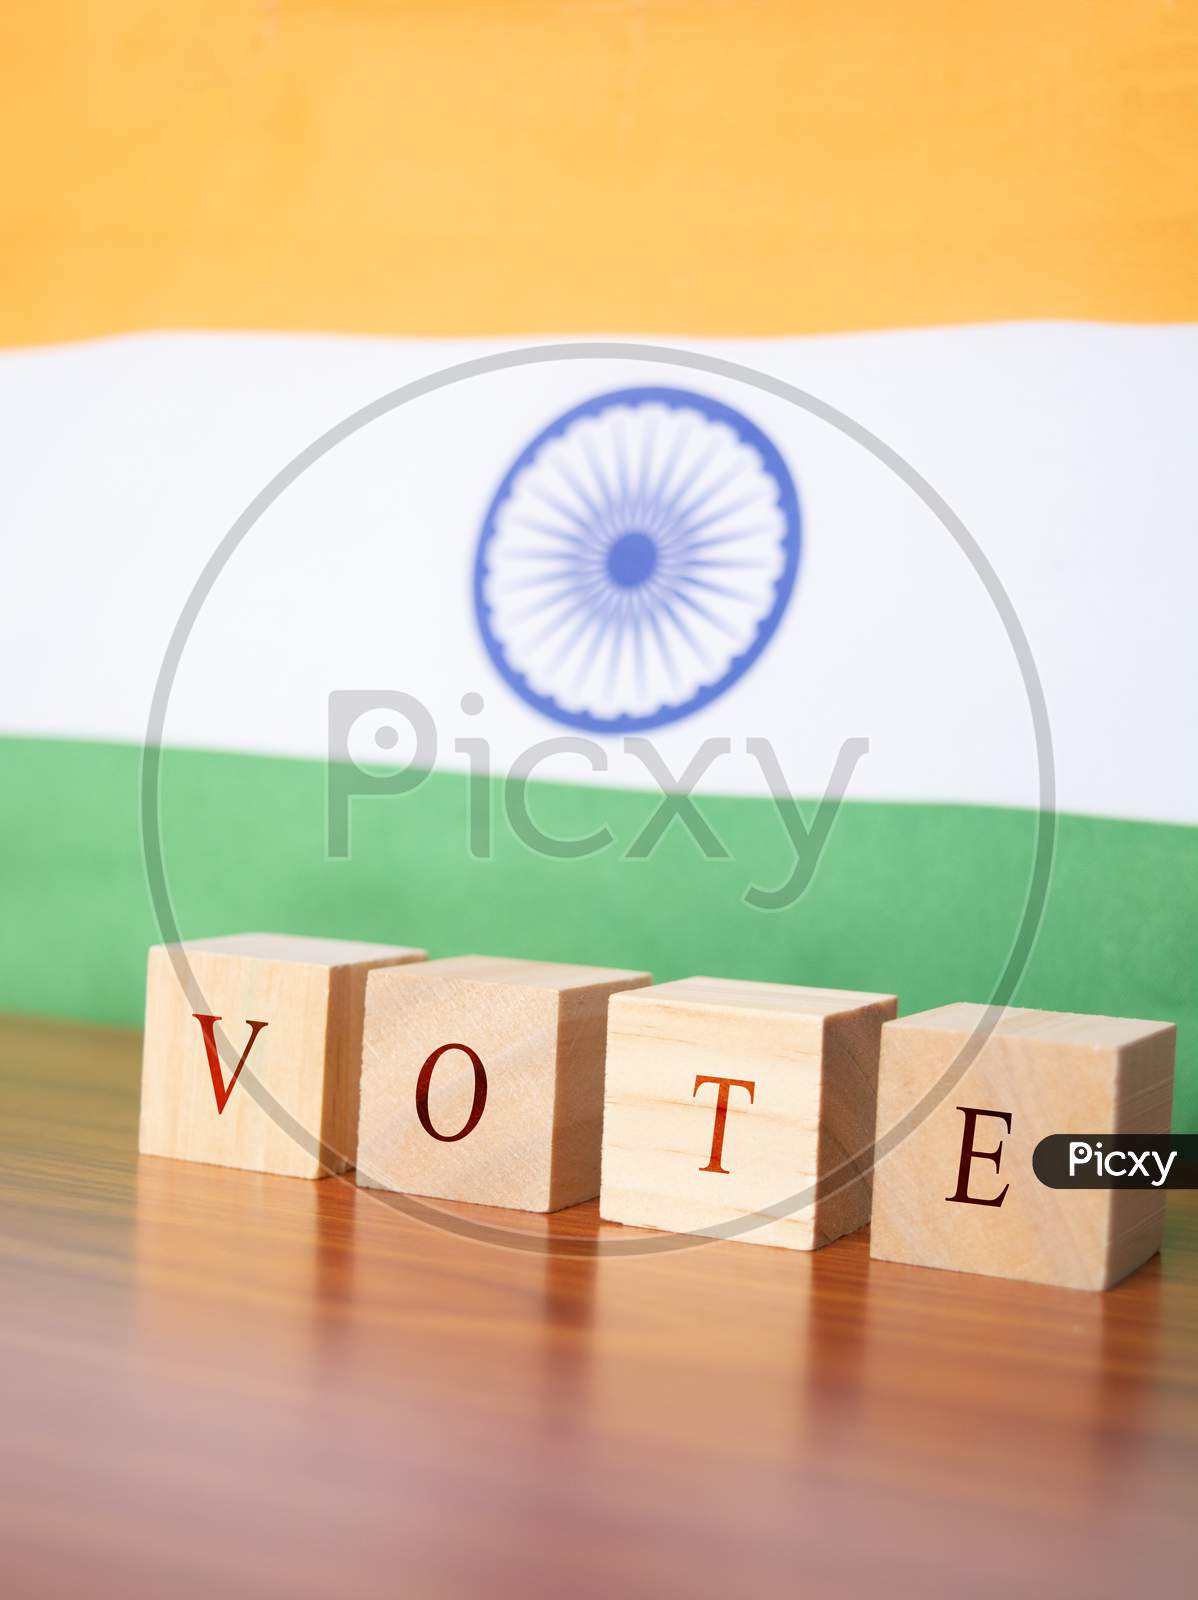 Concept Of Indian Election, Vote In Wooden Letters On Table, Indian Flalg As A Background.